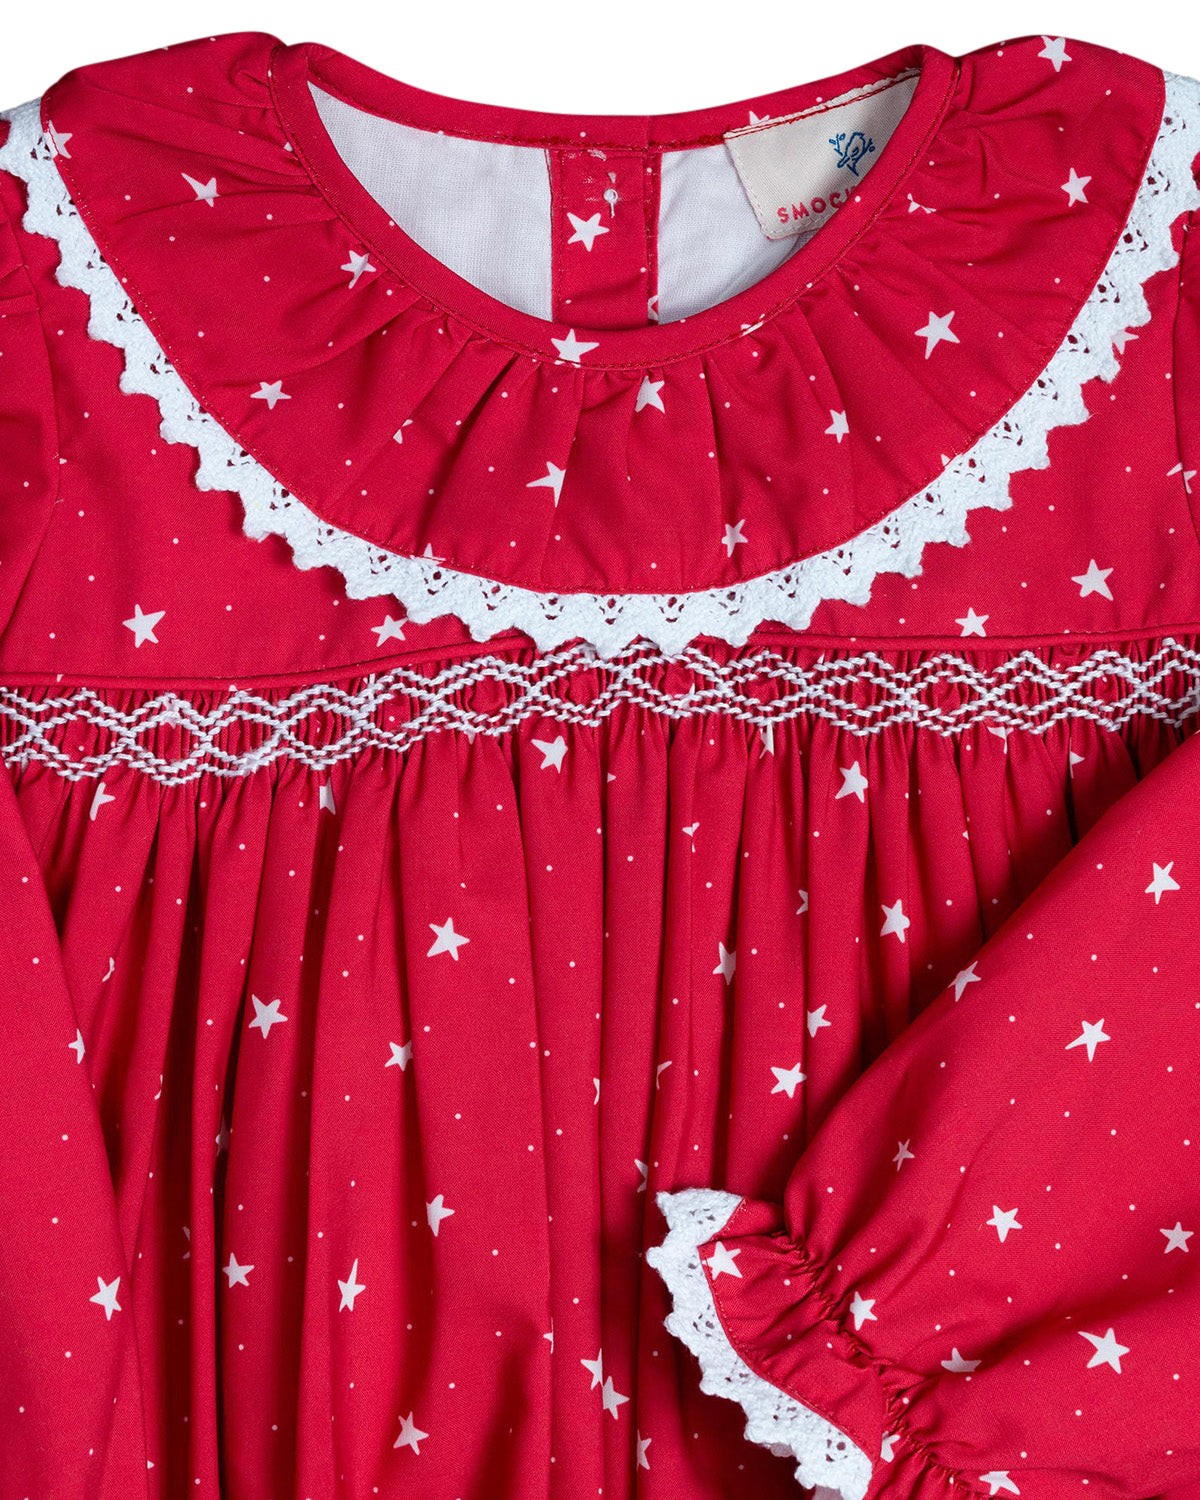 Red Star Print Smocked Bubble - FINAL SALE